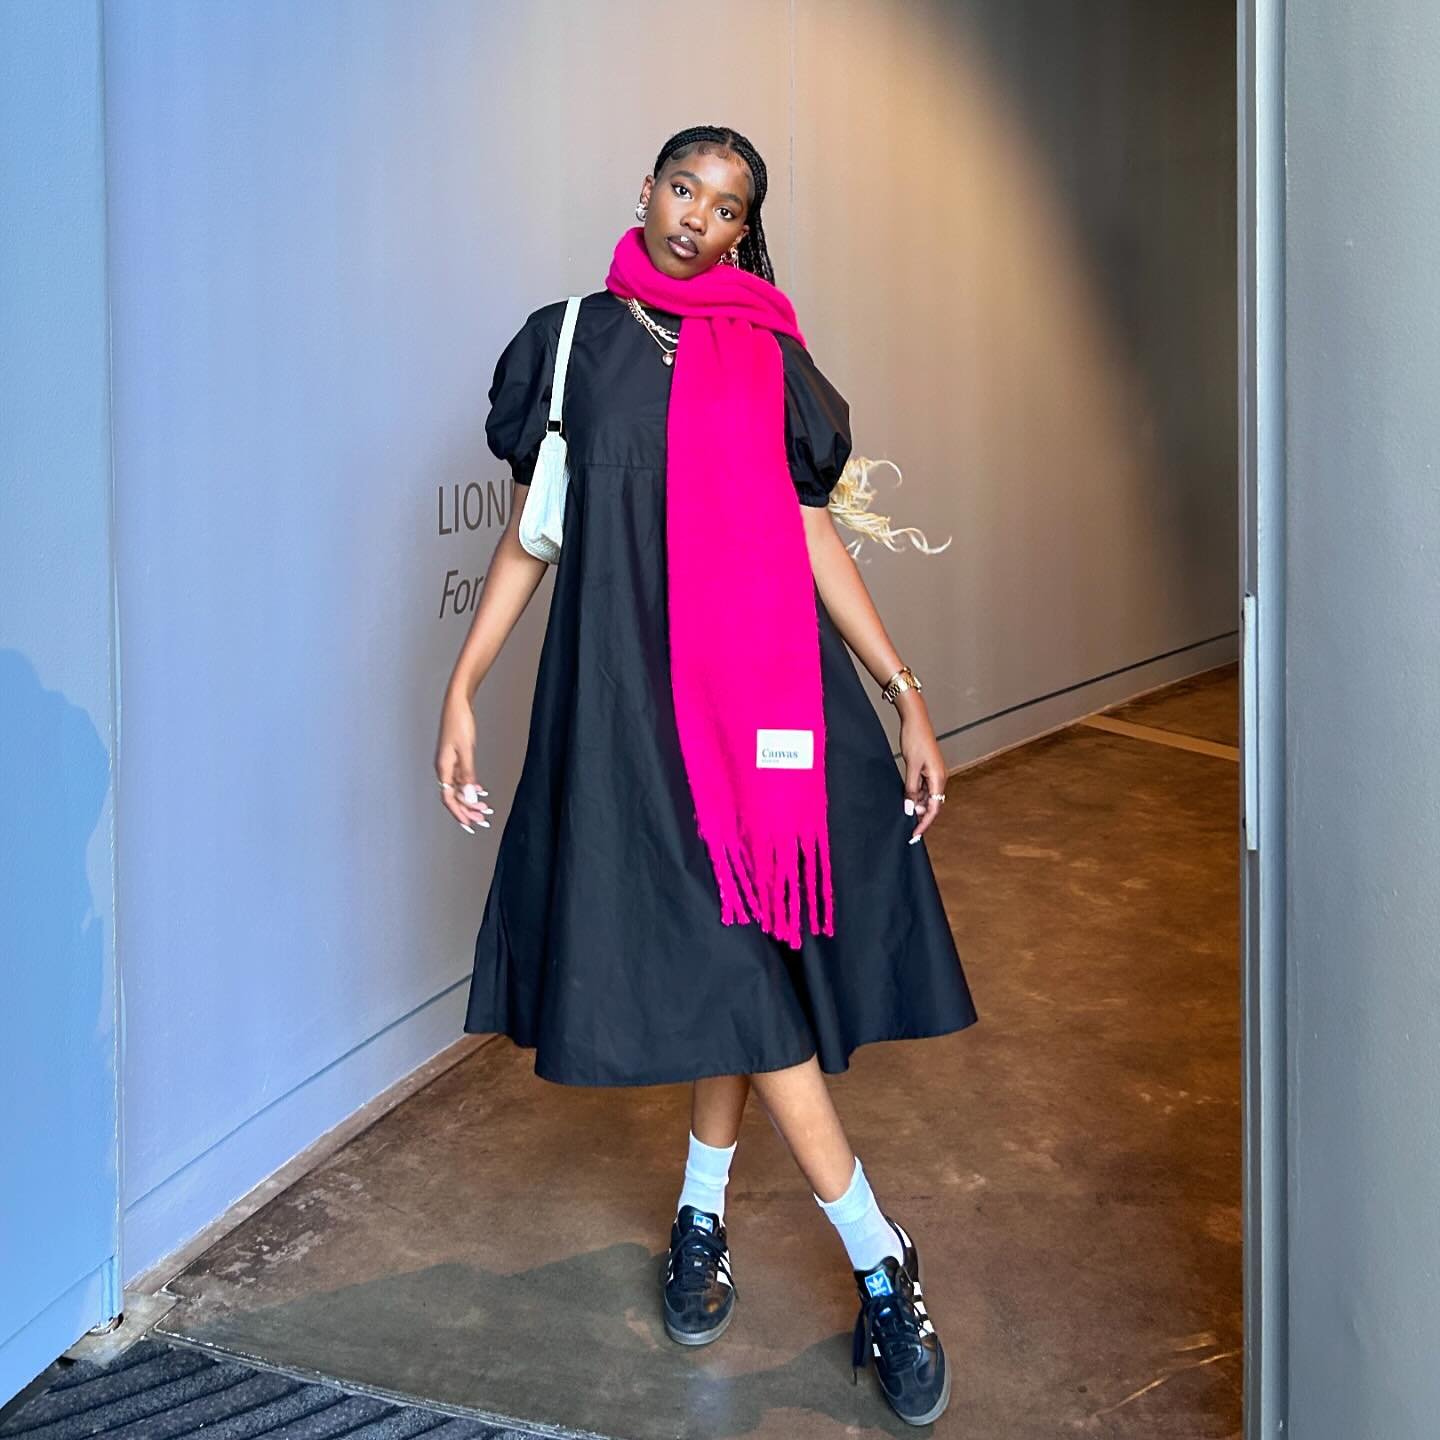 Our bold pink, chunky scarf is giving everything on @jai__mt 🤌🏽💖 The oversized design and chunky tassels add a touch of whimsy and playfulness to any outfit #CanvasGirls

Shop our Canvas Studios Fluffy Chunky Scarf only on Bash.